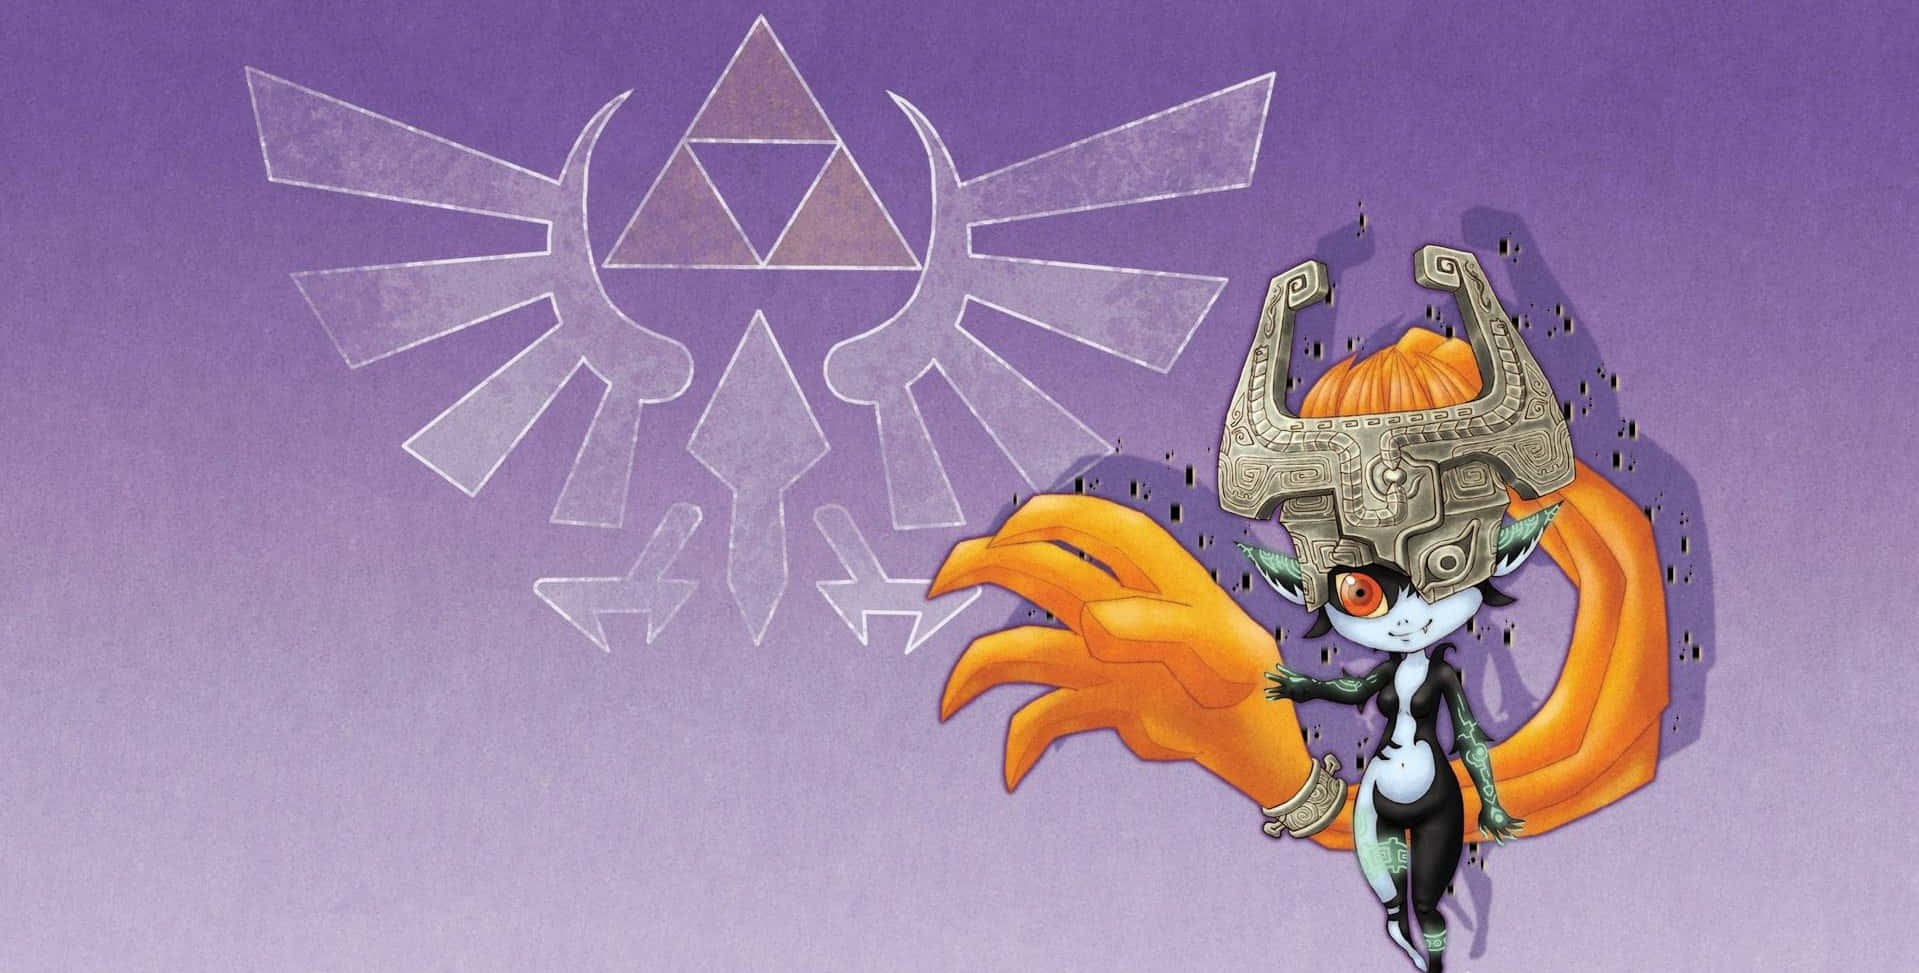 Midna, the Twilight Princess, with Link and Wolf Link in The Legend of Zelda game series. Wallpaper